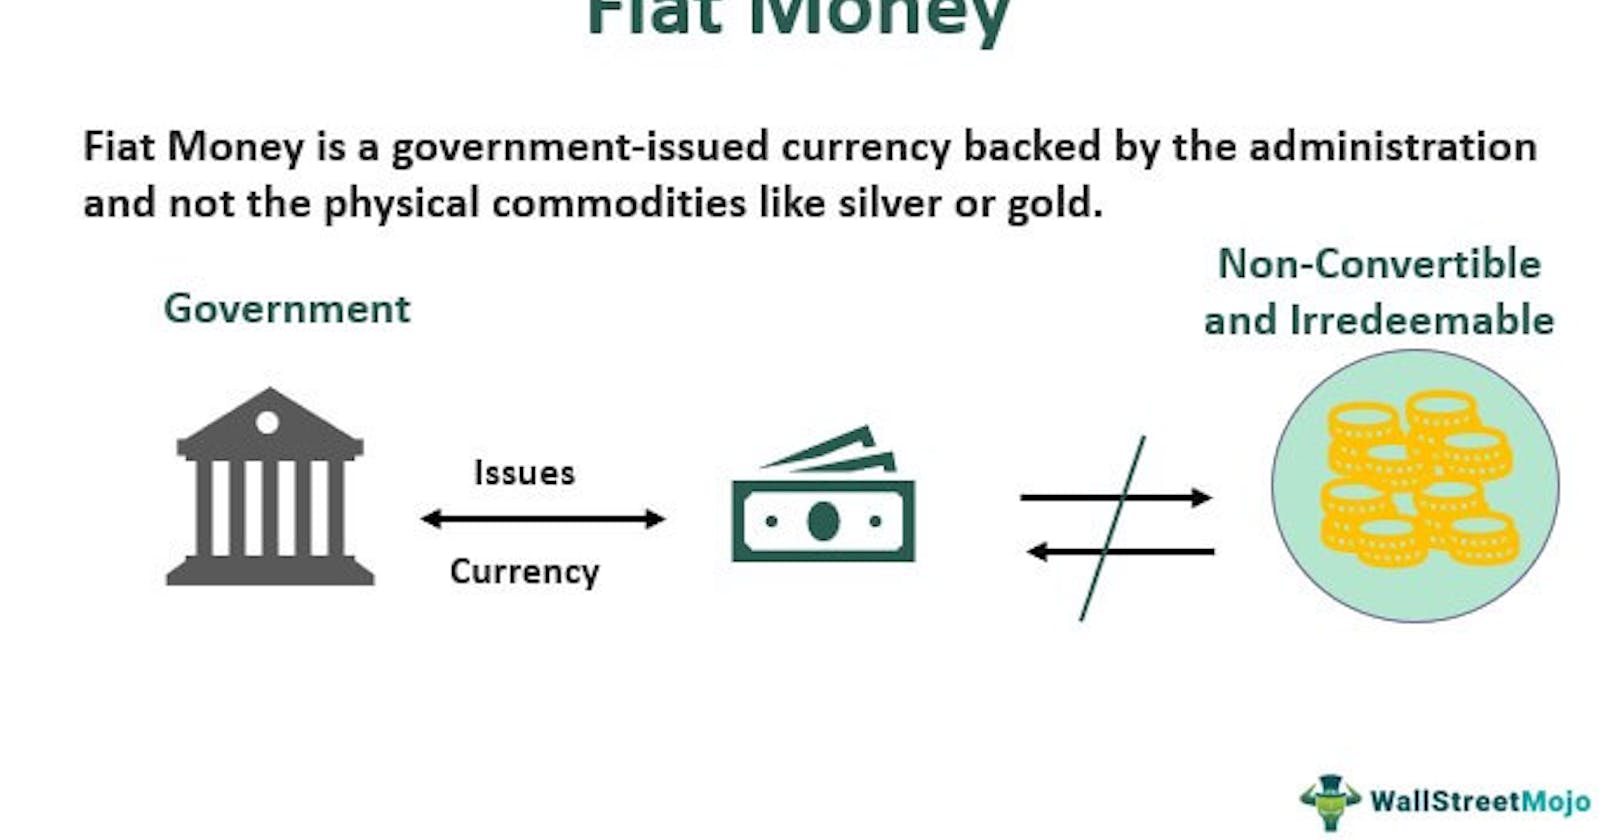 Problems with fiat currency